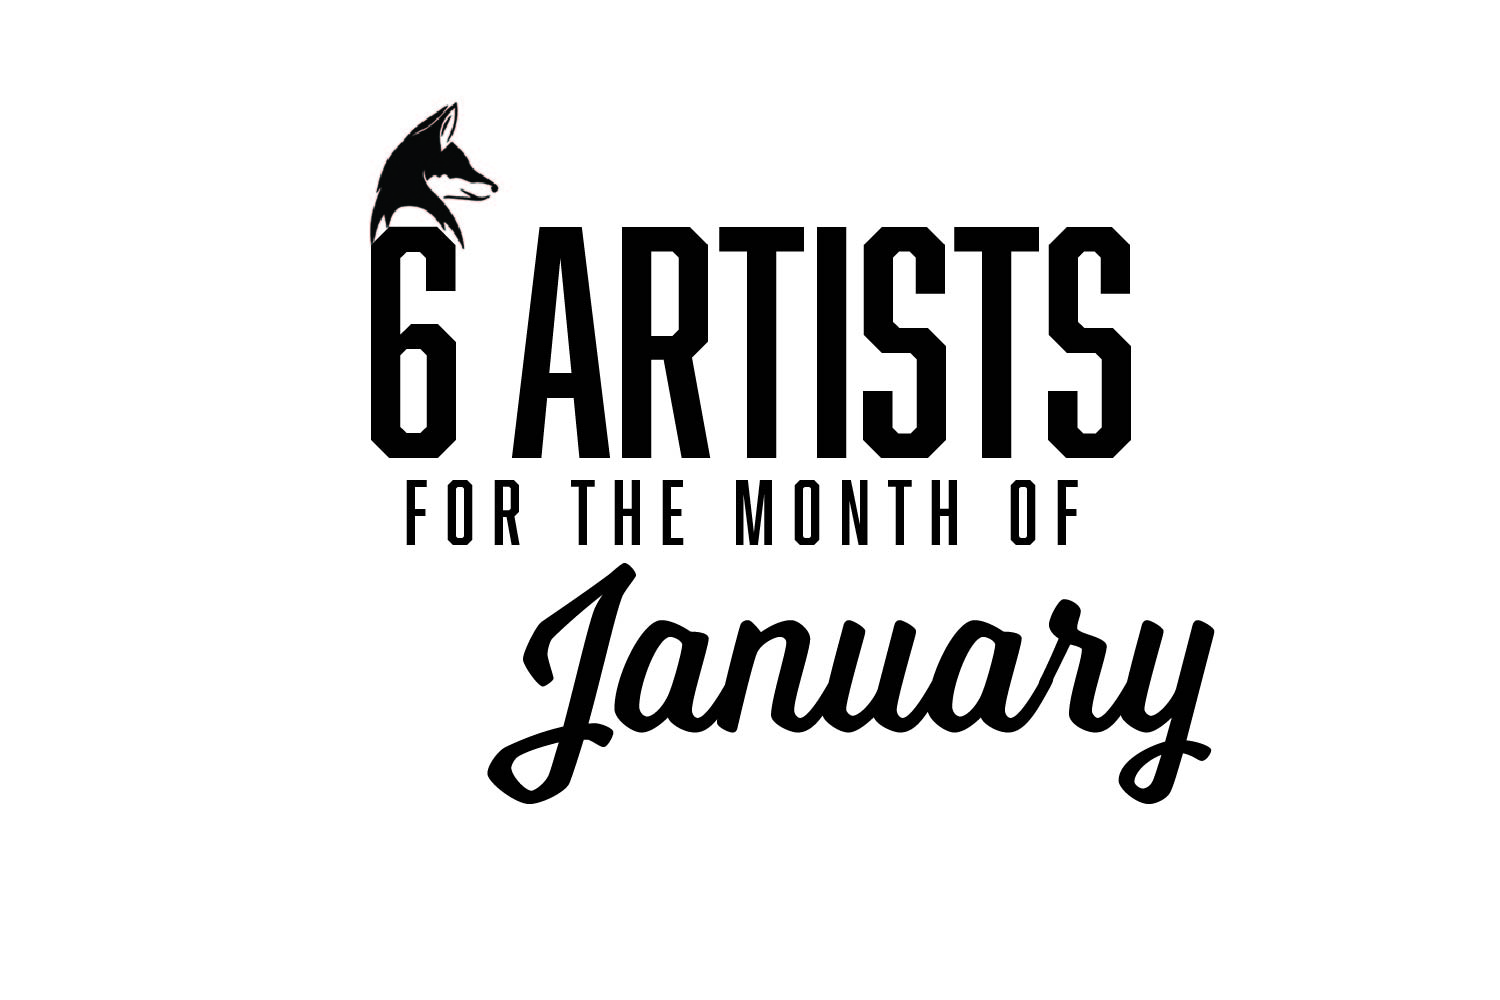 SIX ARTISTS YOU SHOULD BE LISTENING TO: JANUARY 2023